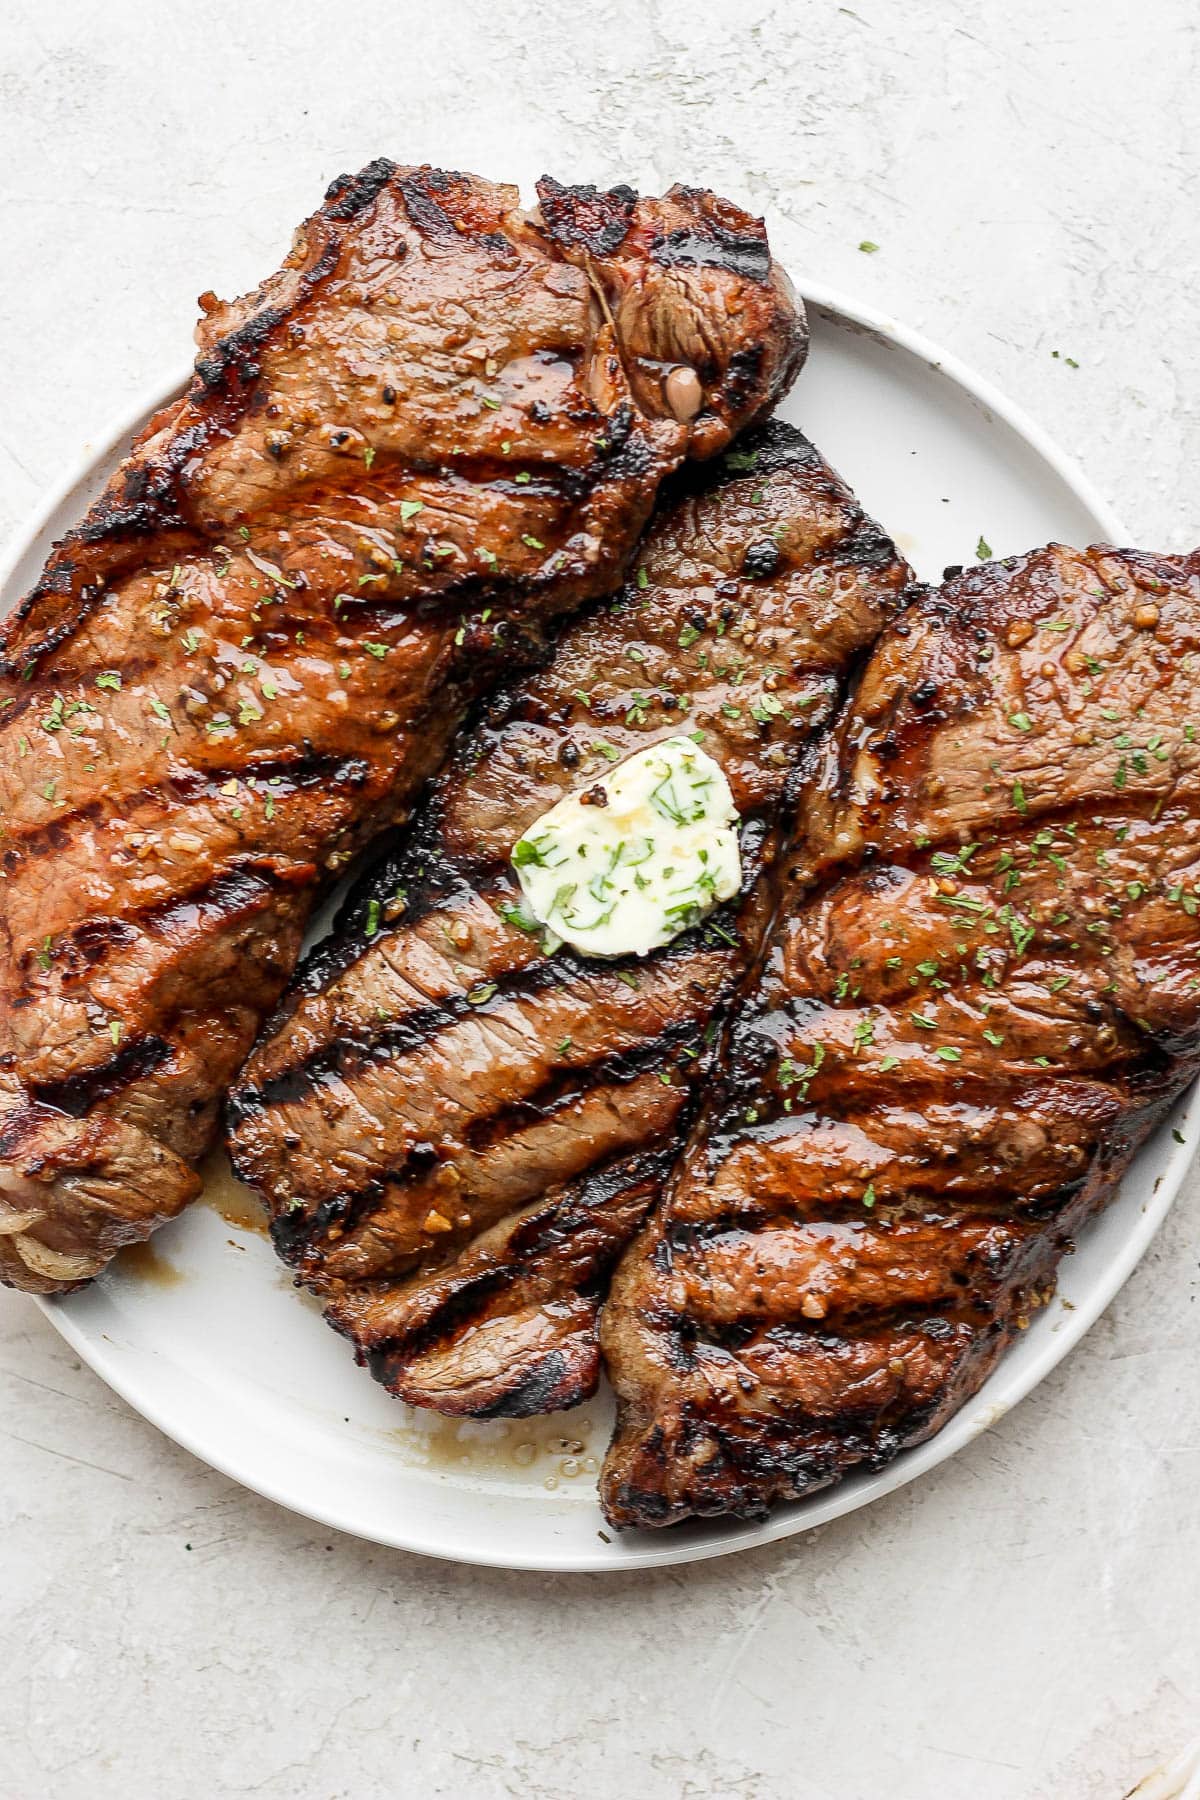 Three steaks on a plate, grilled with grill marks, and herbed butter on the middle one. 